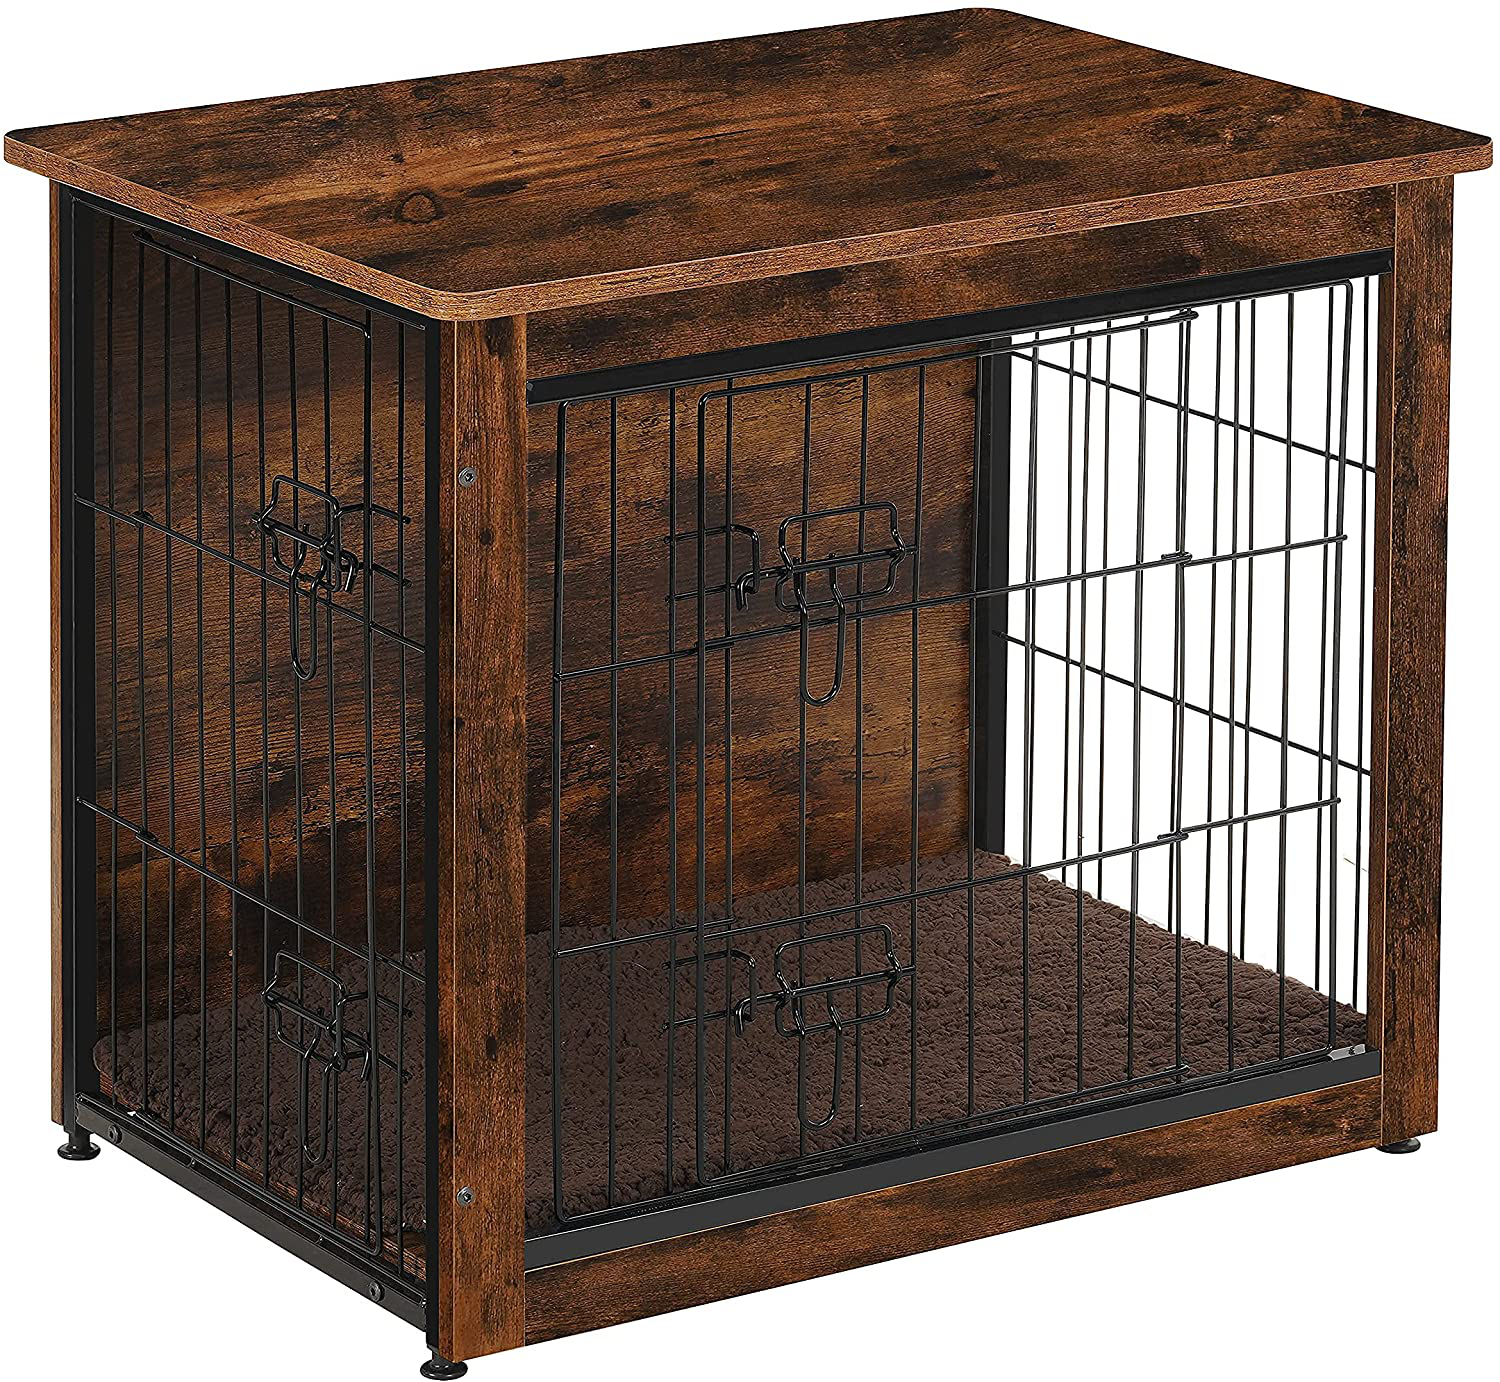 DWANTON Dog Crate Furniture, Wooden Pet Crate End Table, Indoor Dog Kennel for Small/Medium/Large Dog